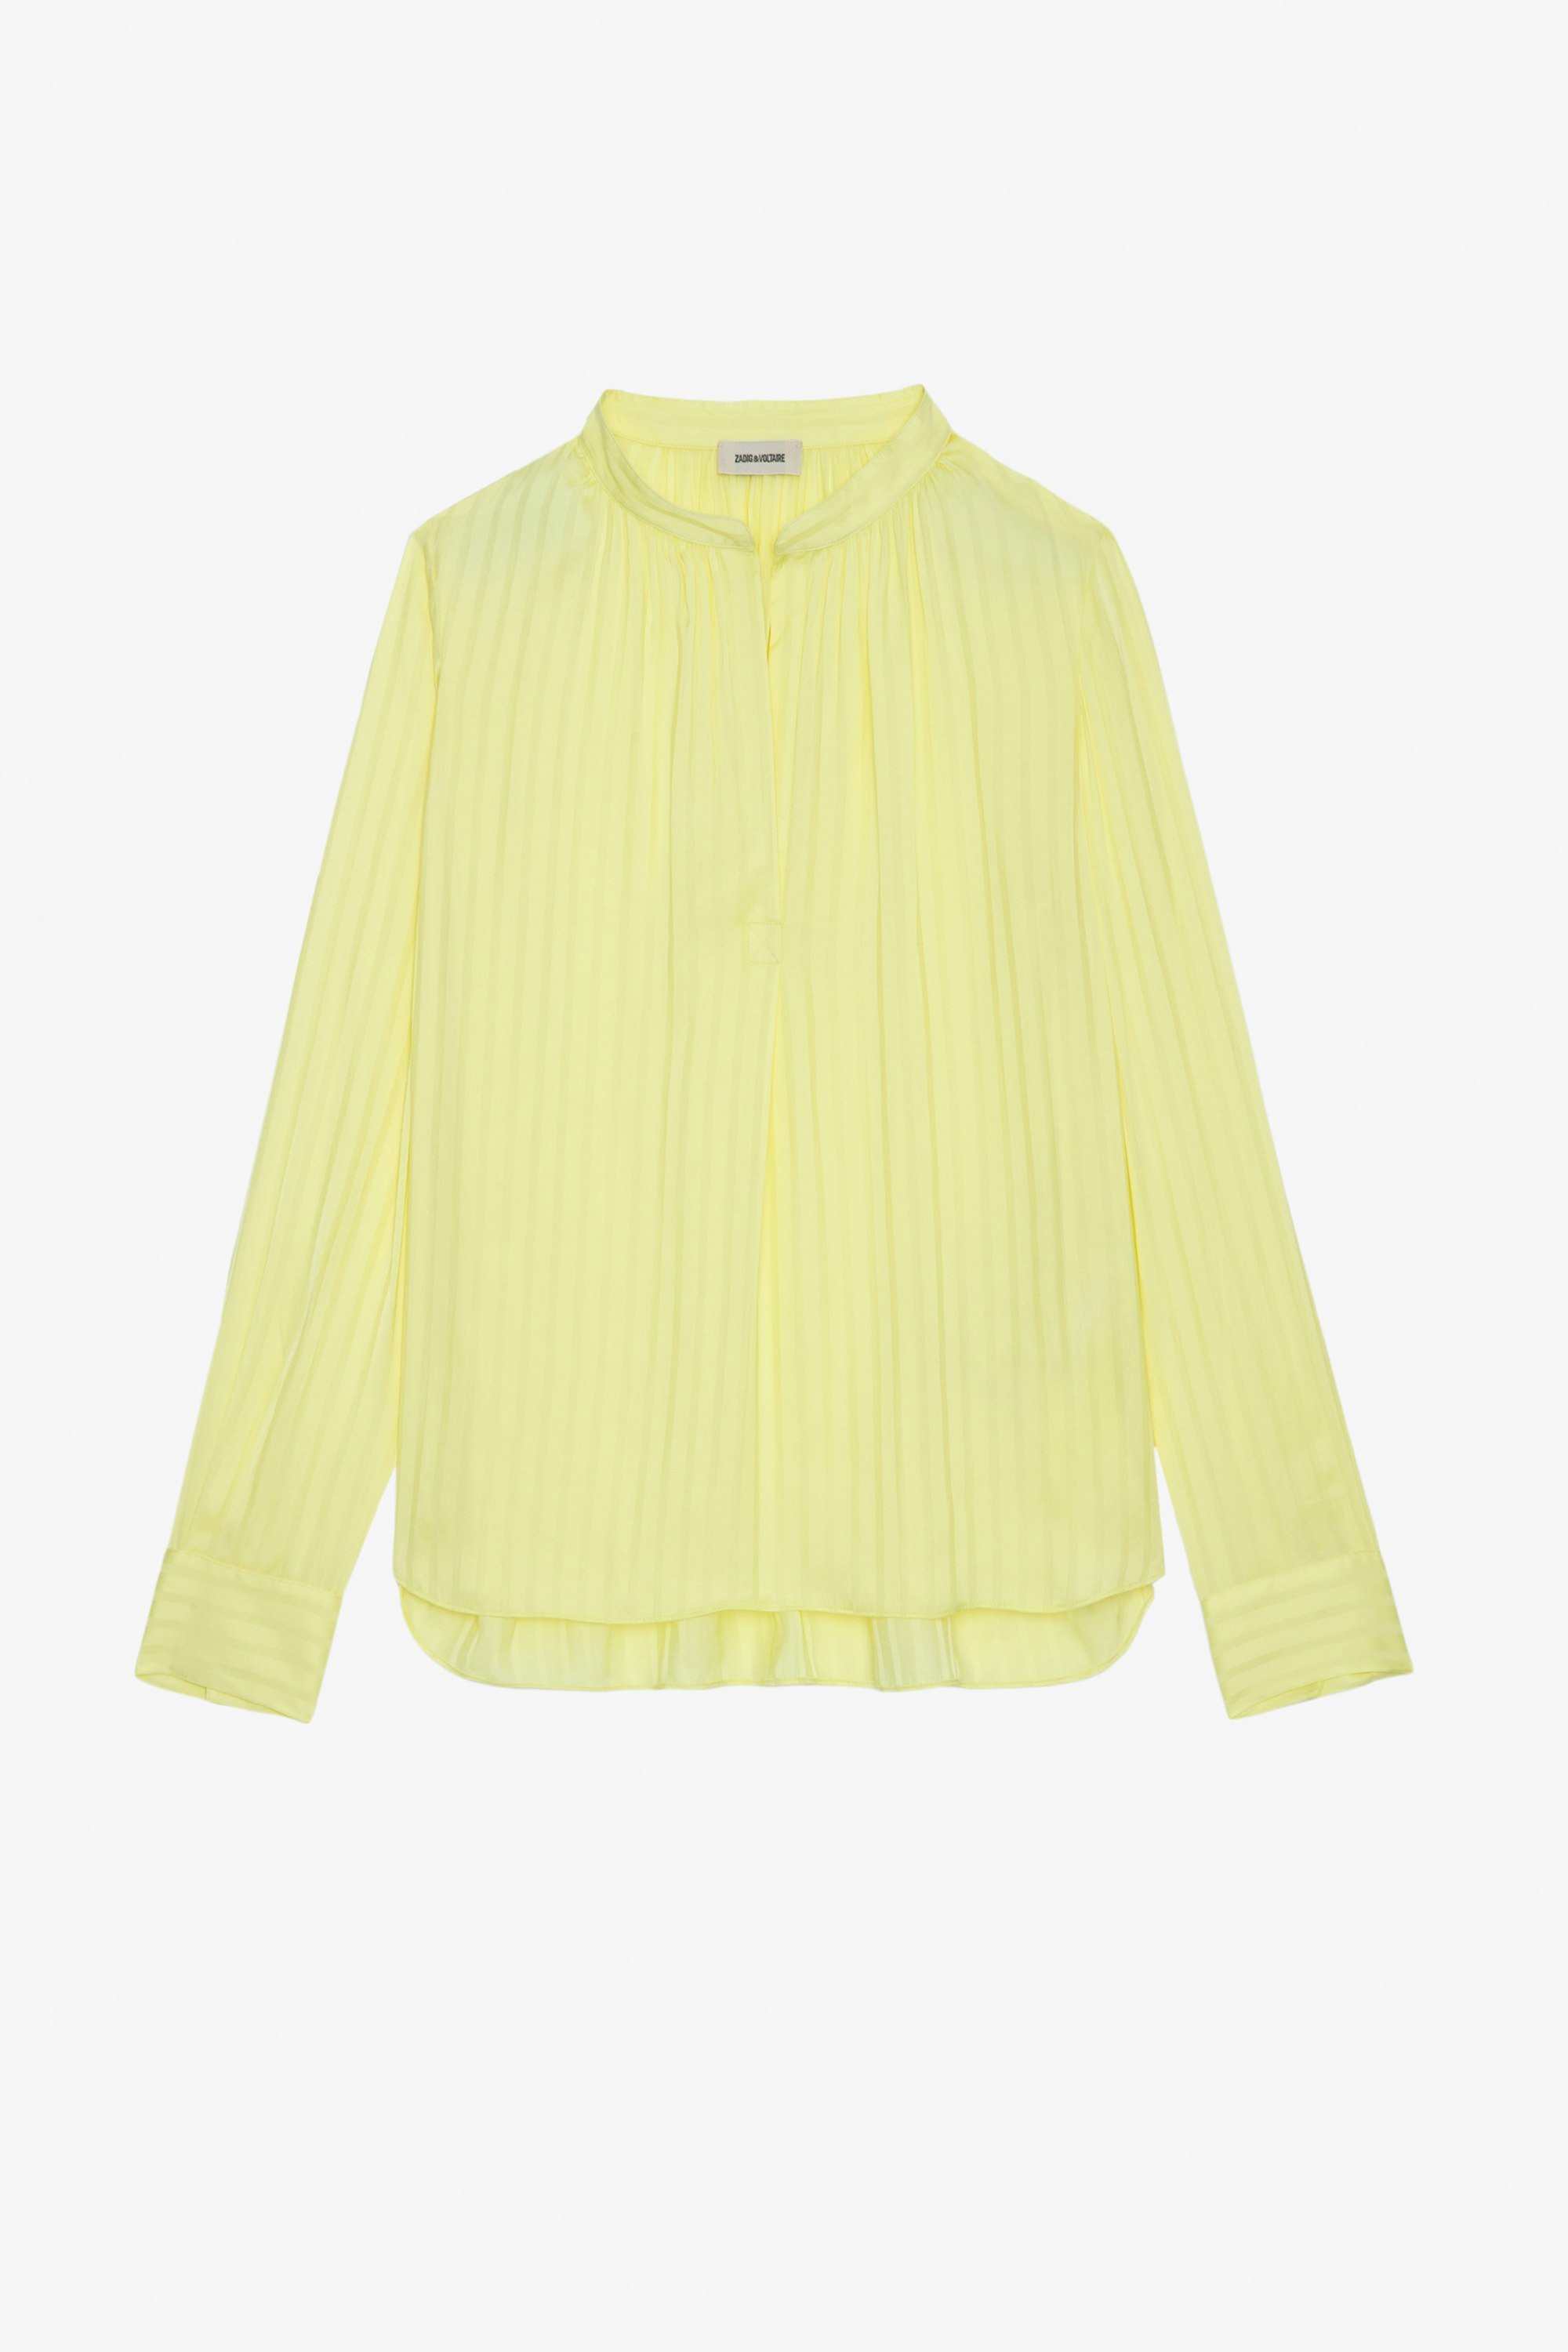 Tink Satin Blouse Women's striped yellow satin blouse with long sleeves